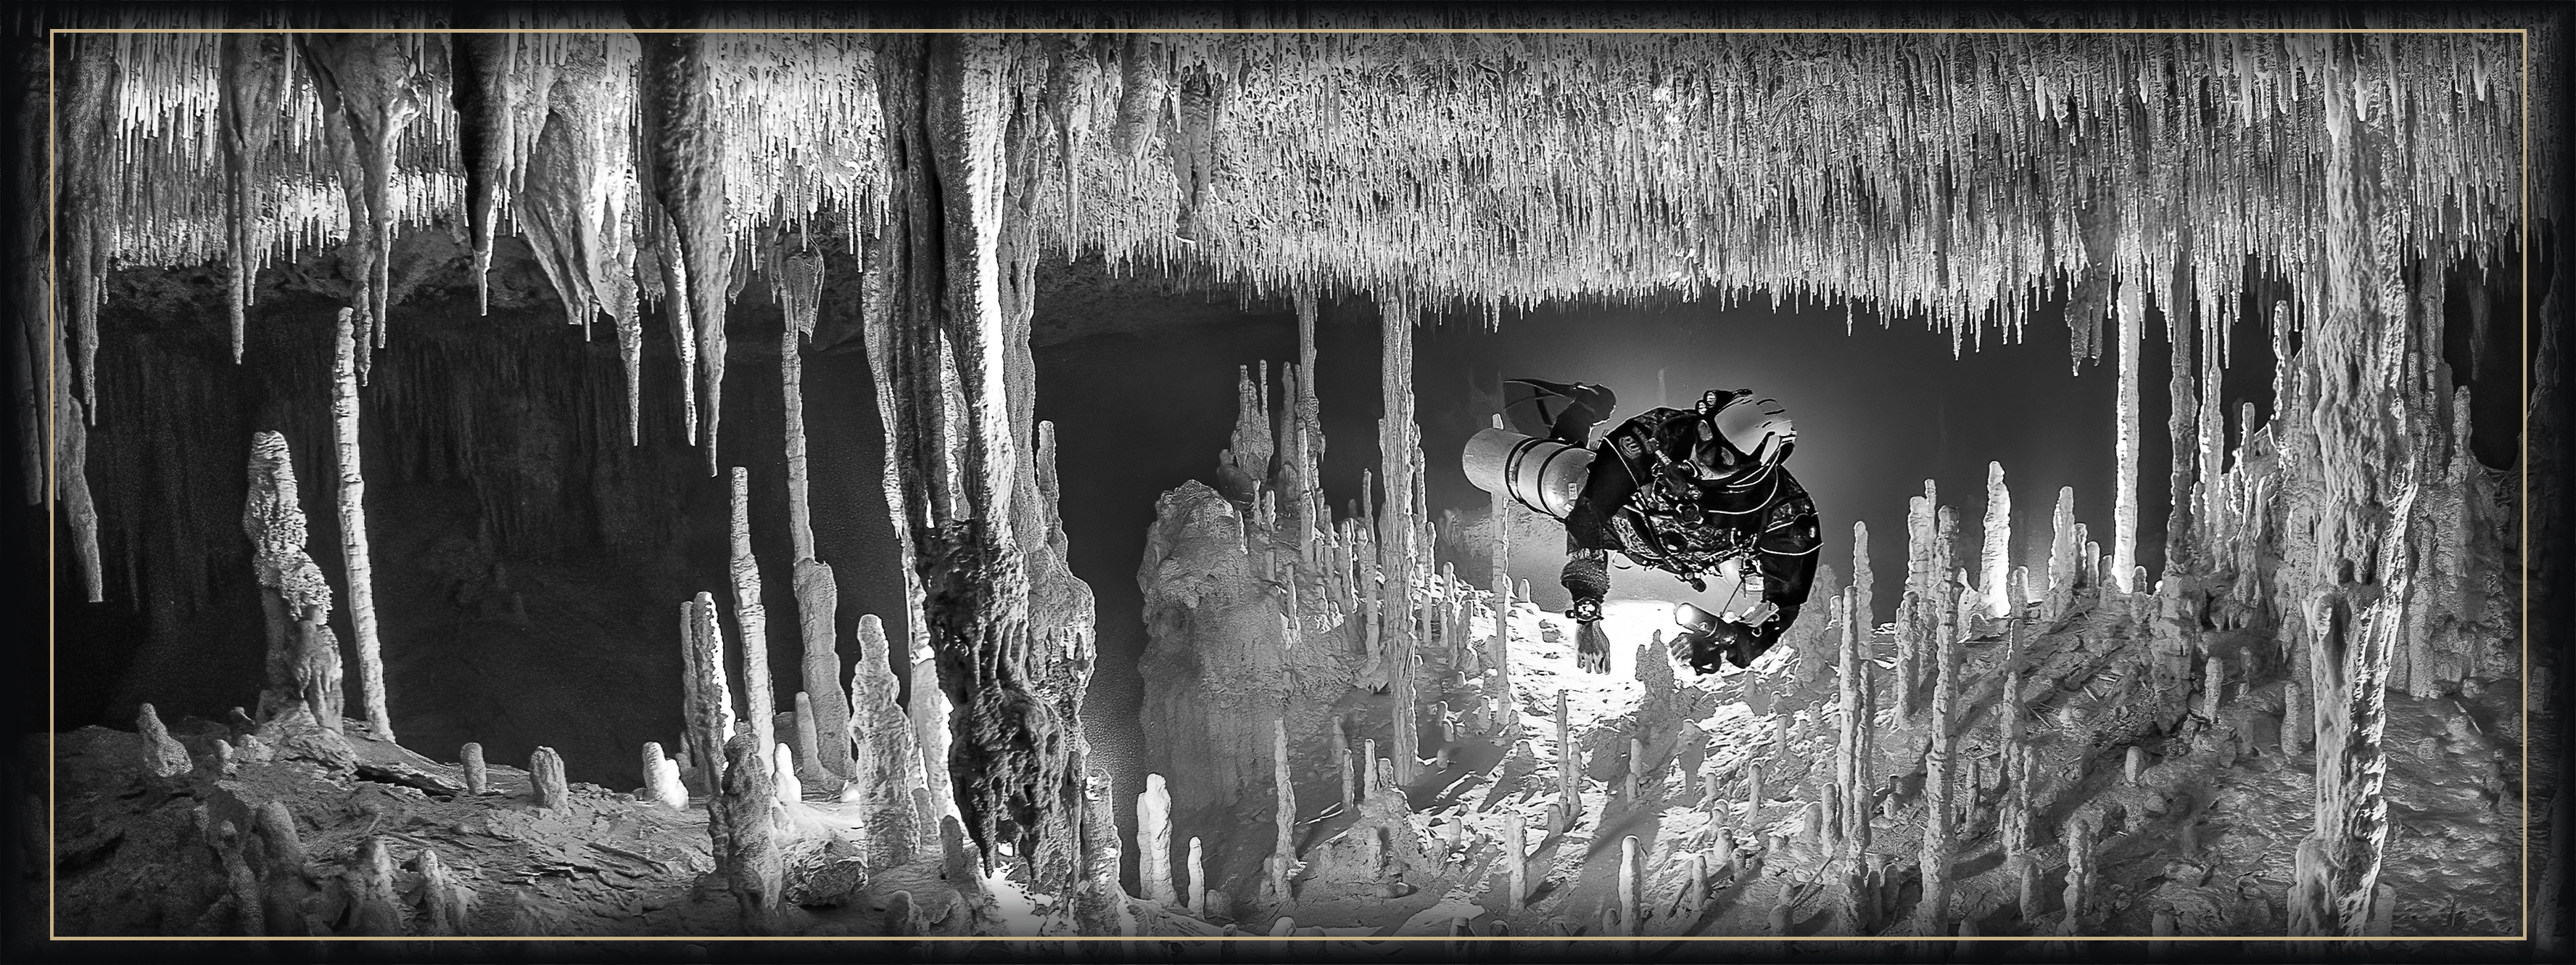 Cover photo for the TDI Full Cave Diver Course